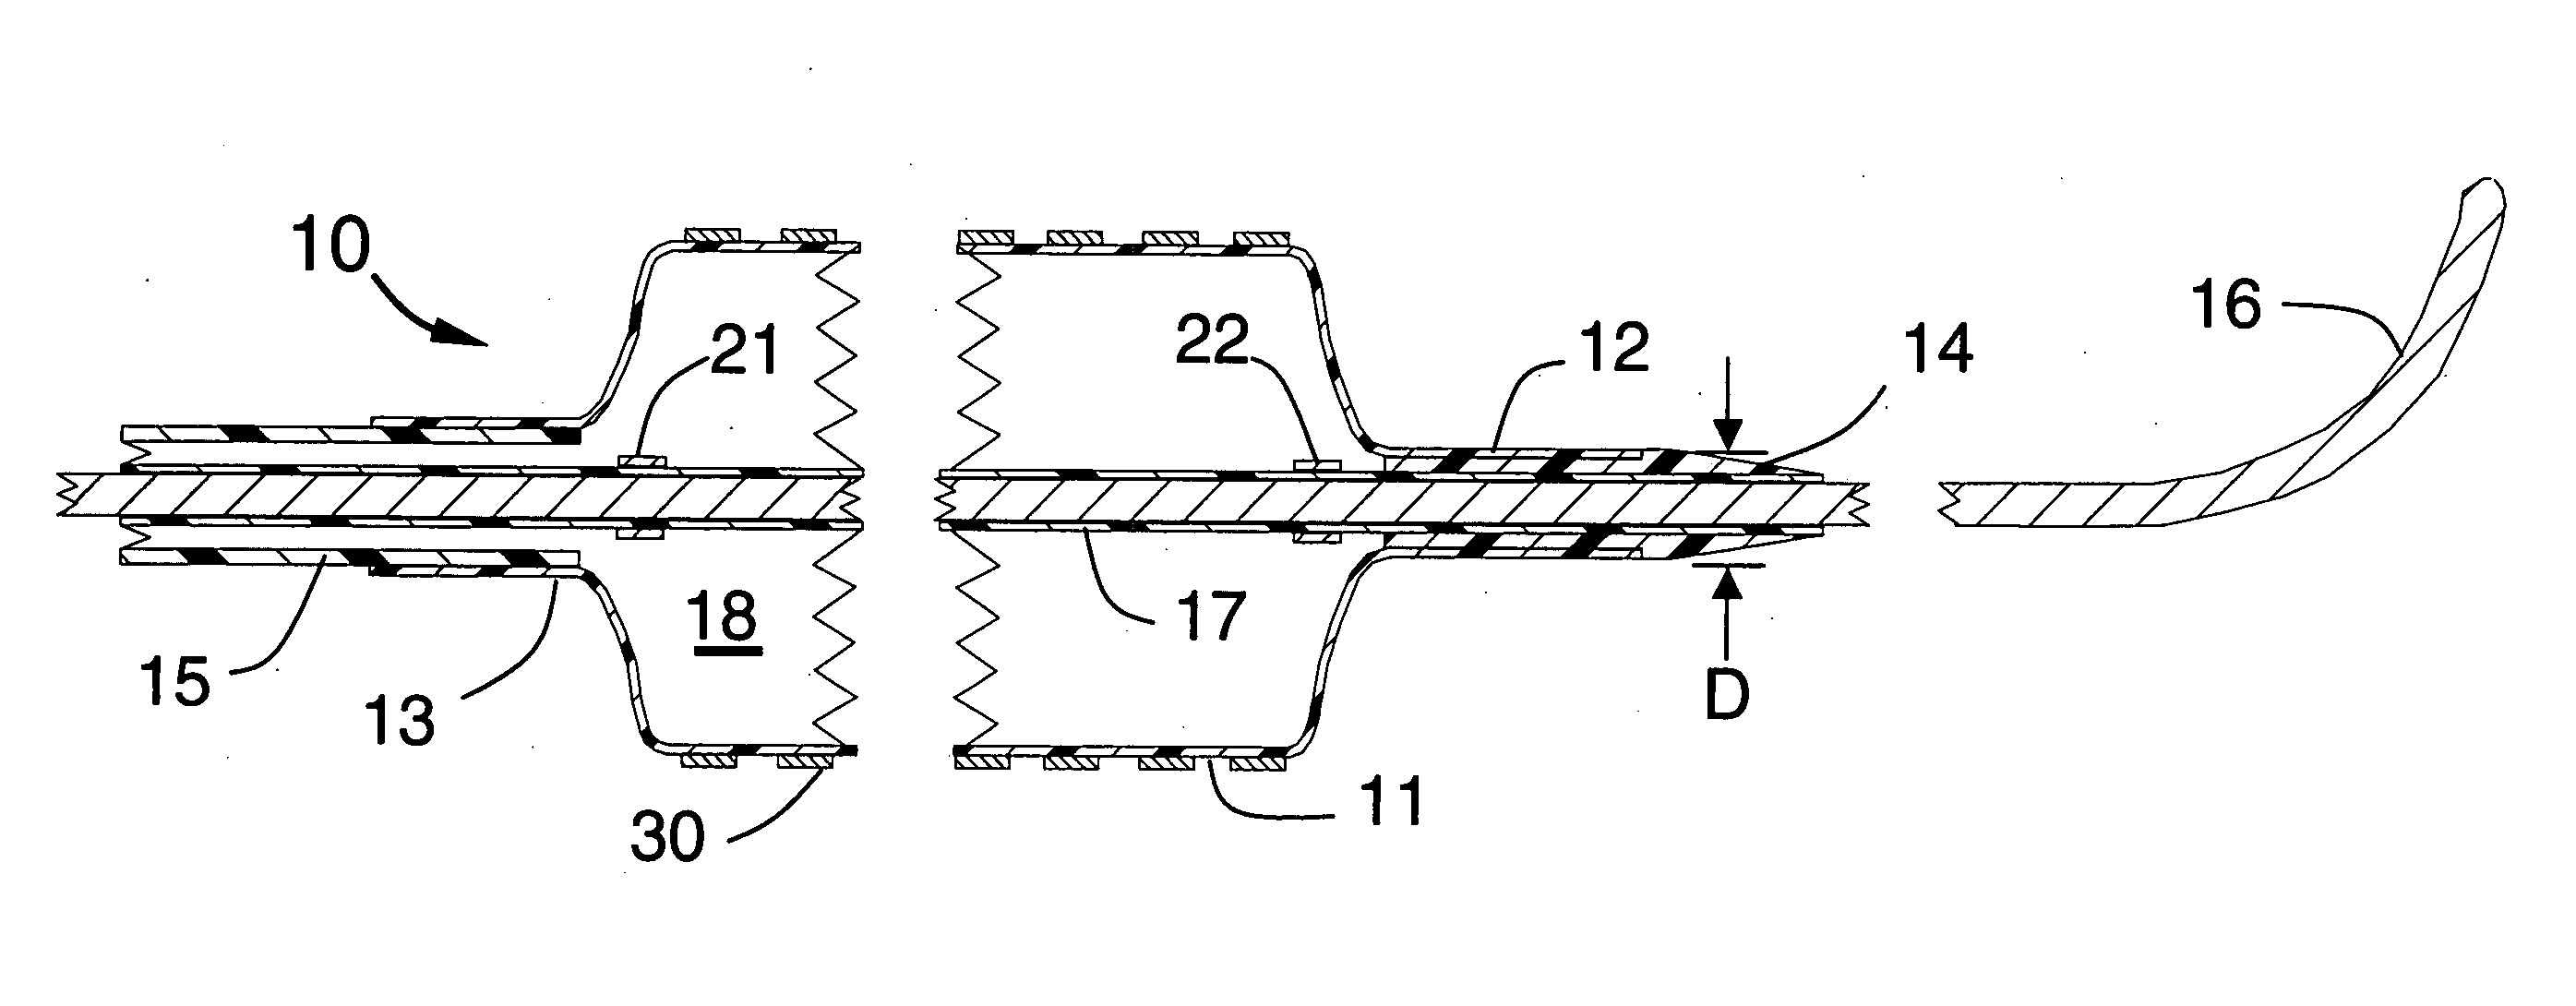 Stent delivery system using a steerable guide wire